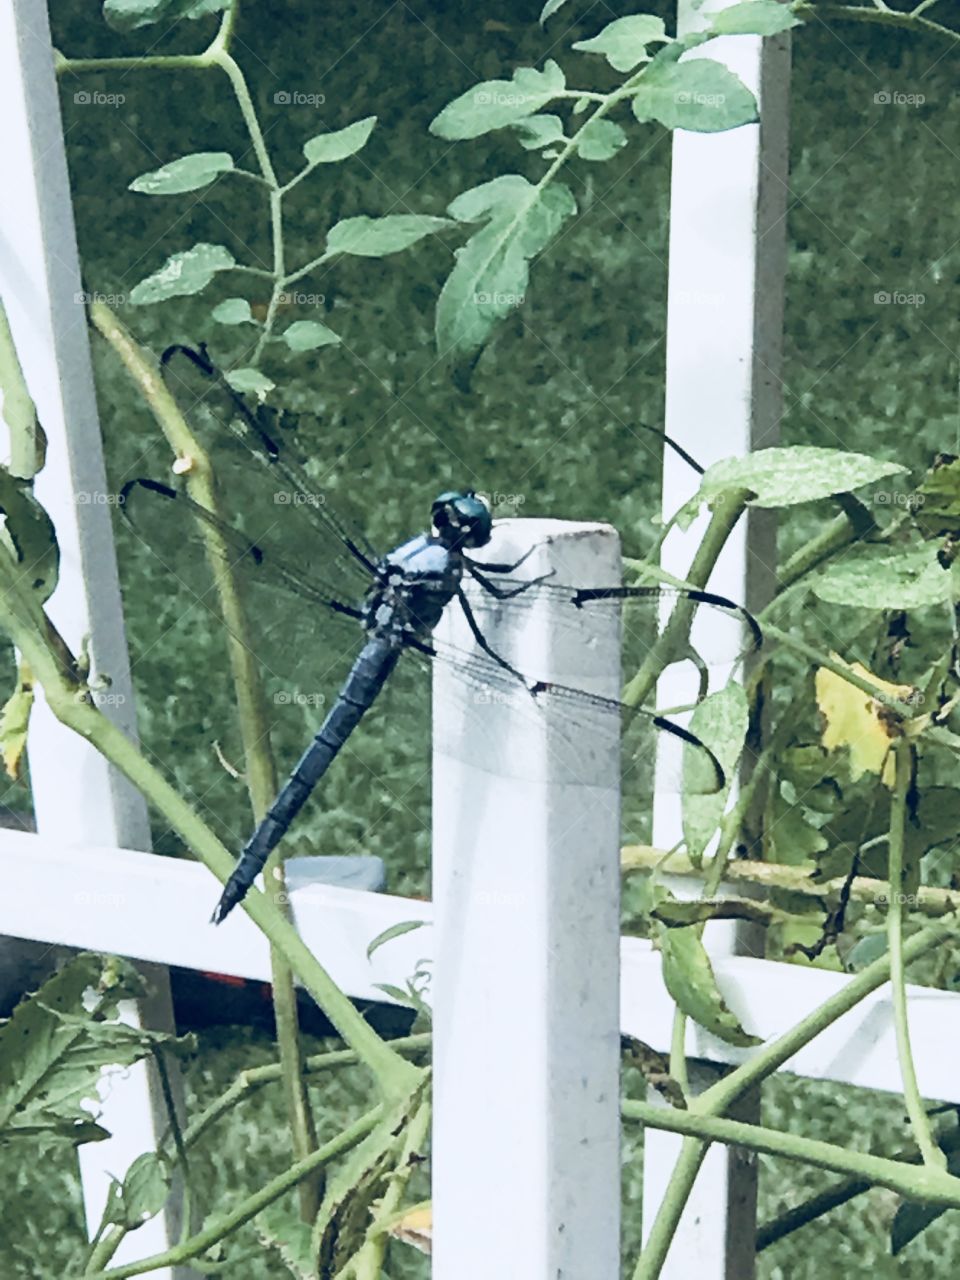 This cool dragonfly has been hanging out recently on the garden stakes in my tomato plants. 